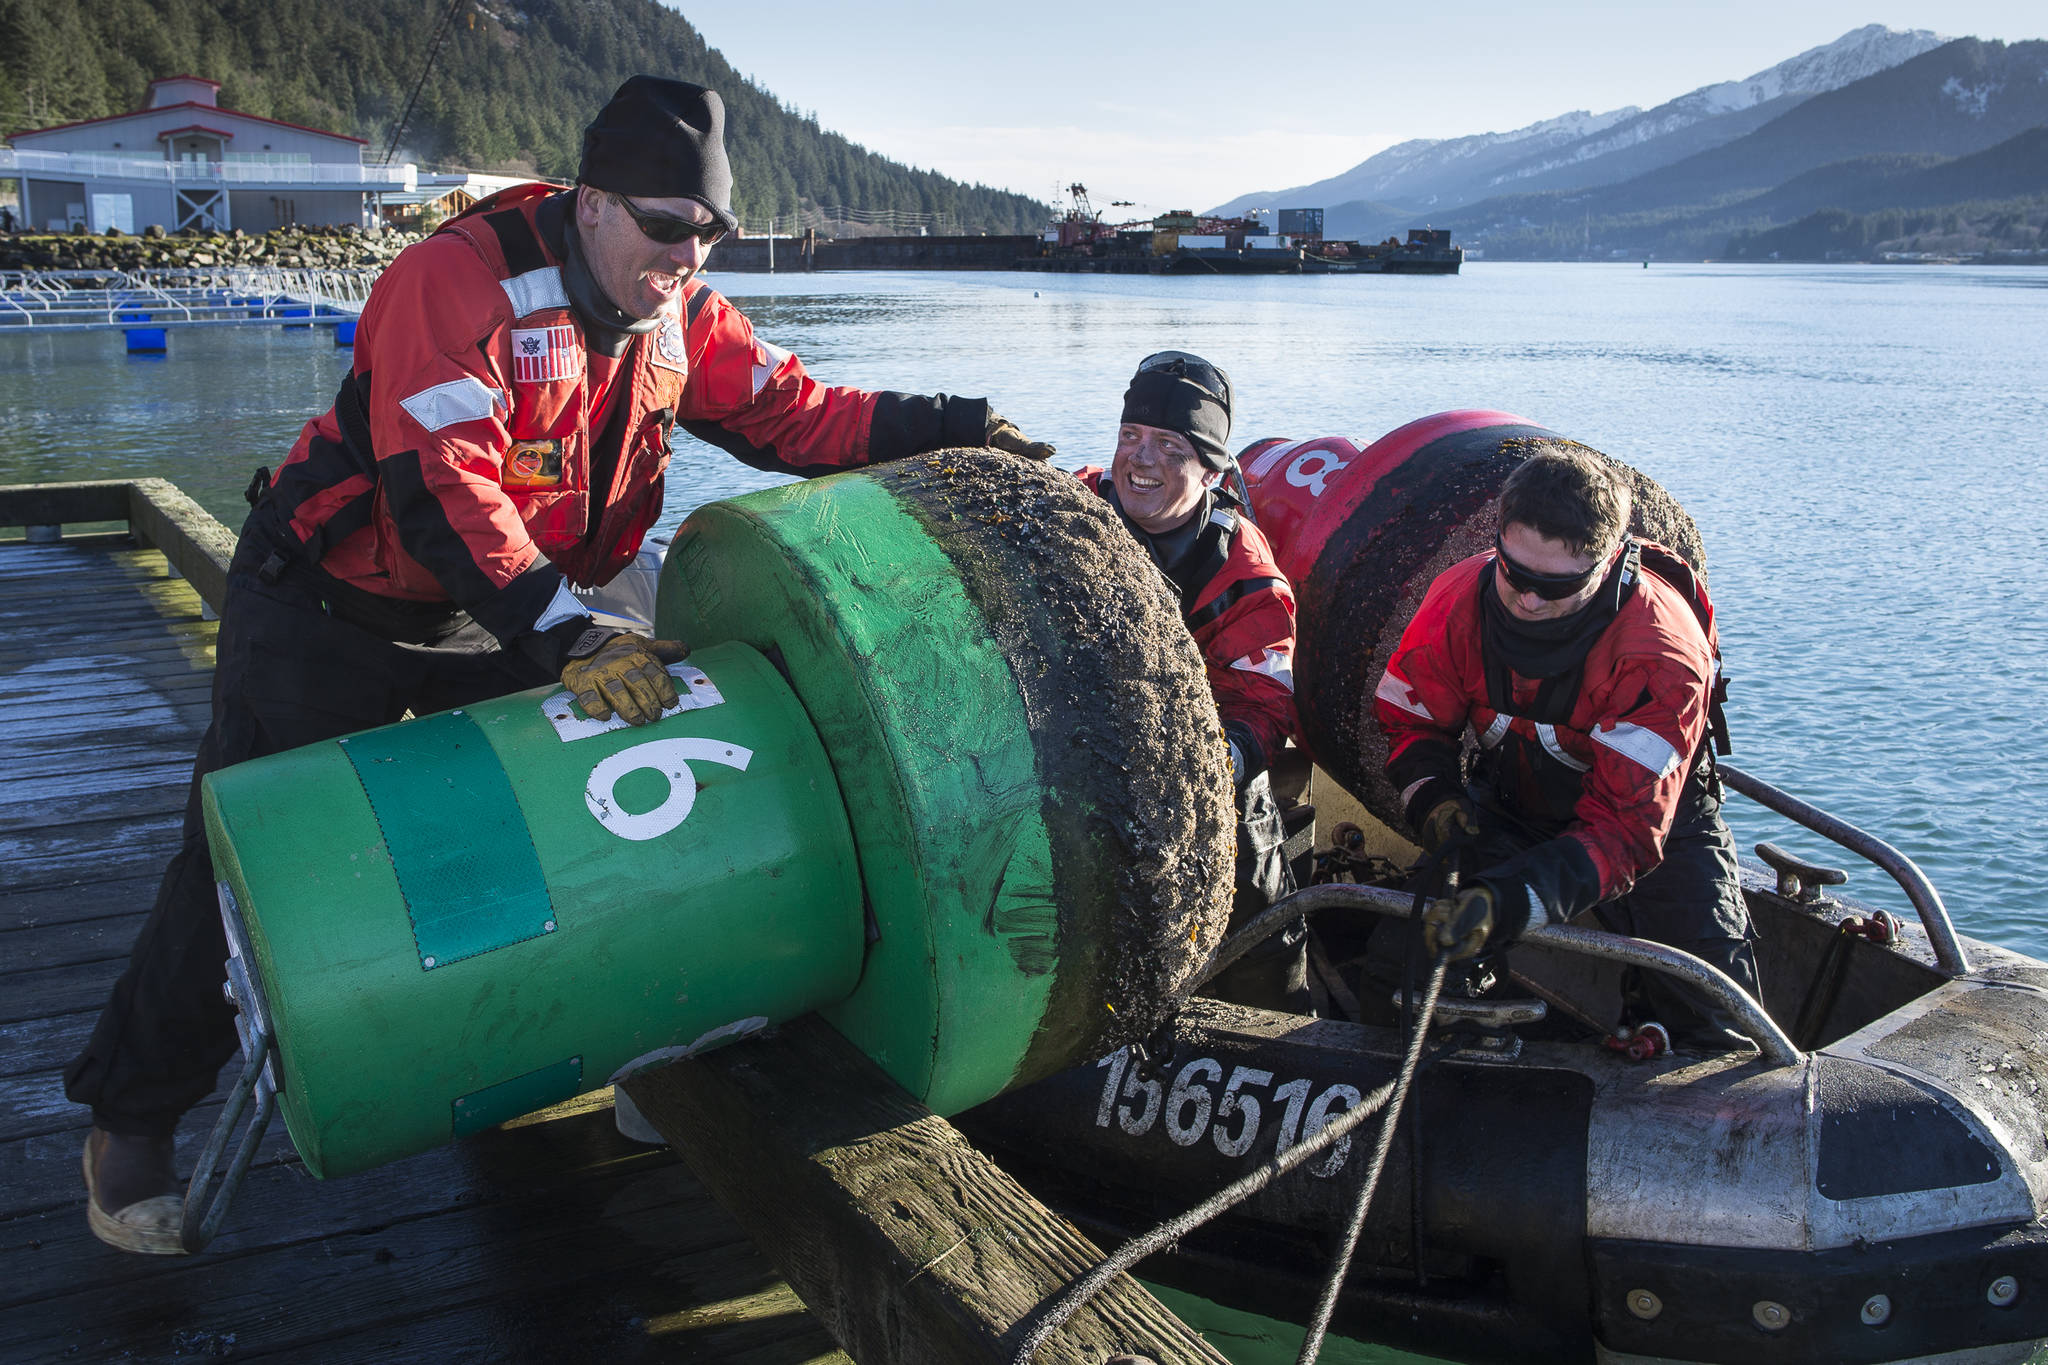 Andrew Tetrault, left, Kevin McManus, center, and Carl Sporleder from the U.S. Coast Guard Cutter Elderberry, a buoy tender based in Petersburg, lift a buoy onto the dock at the Wayside Park on Channel Drive on Monday, Nov. 5, 2018. The 19 buoys that mark the passage through the Mendenhall Bar were taken out for the season. (Michael Penn | Juneau Empire)